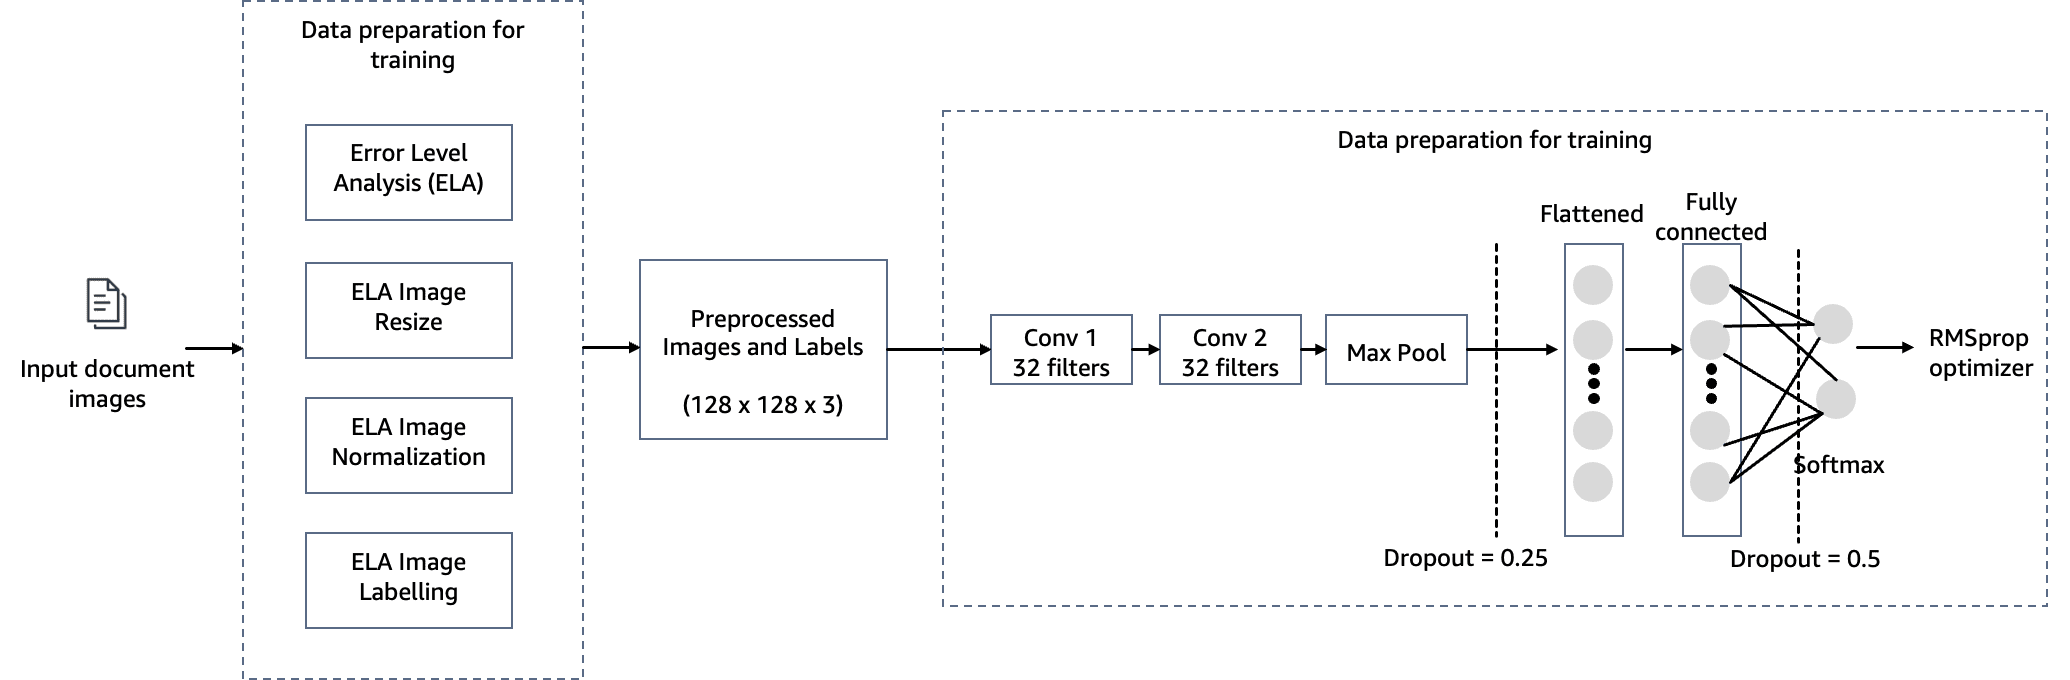 Tampering detection model architecture